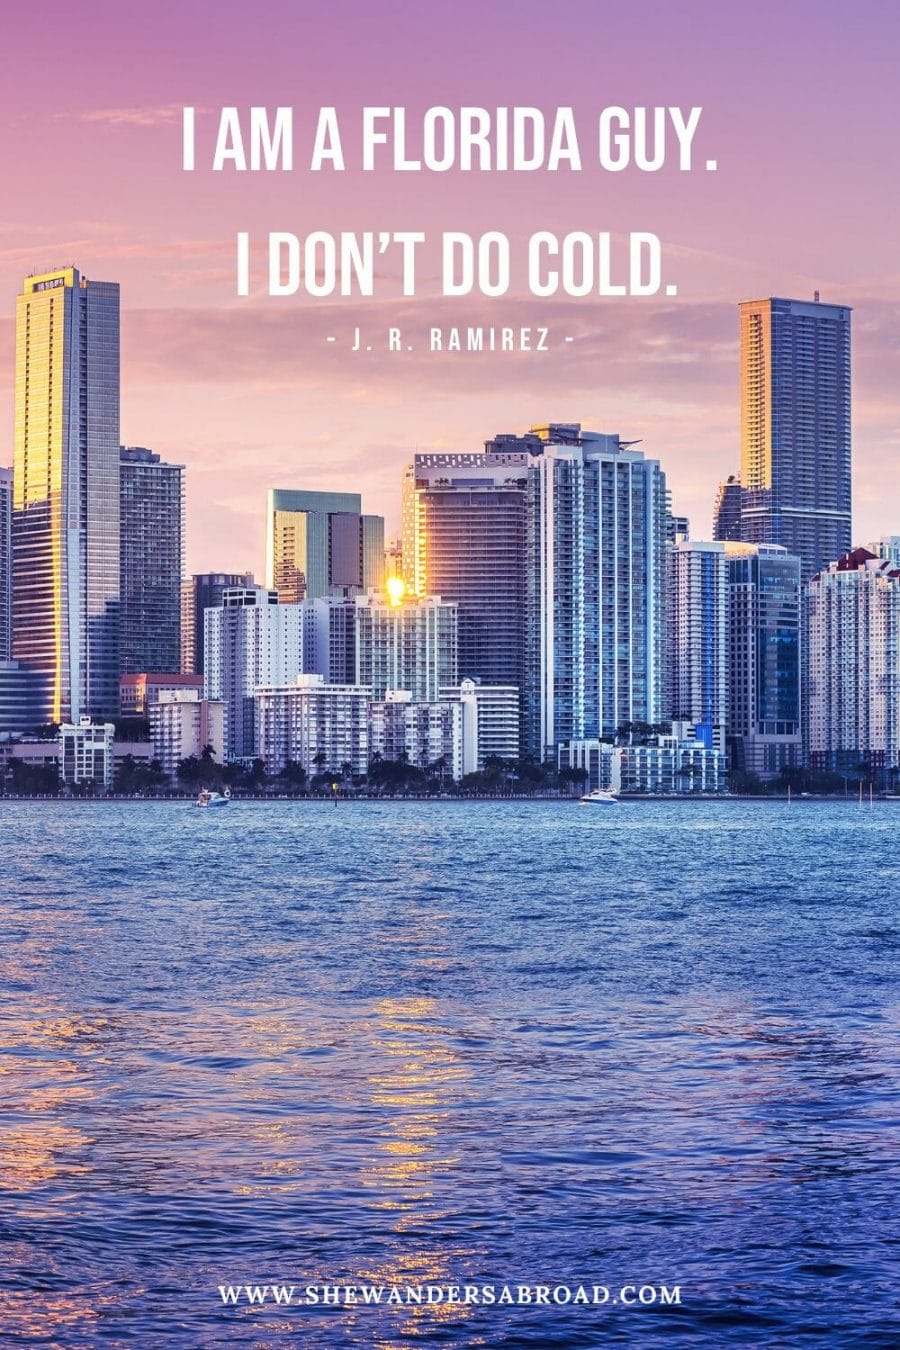 Funny Florida Quotes for Instagram